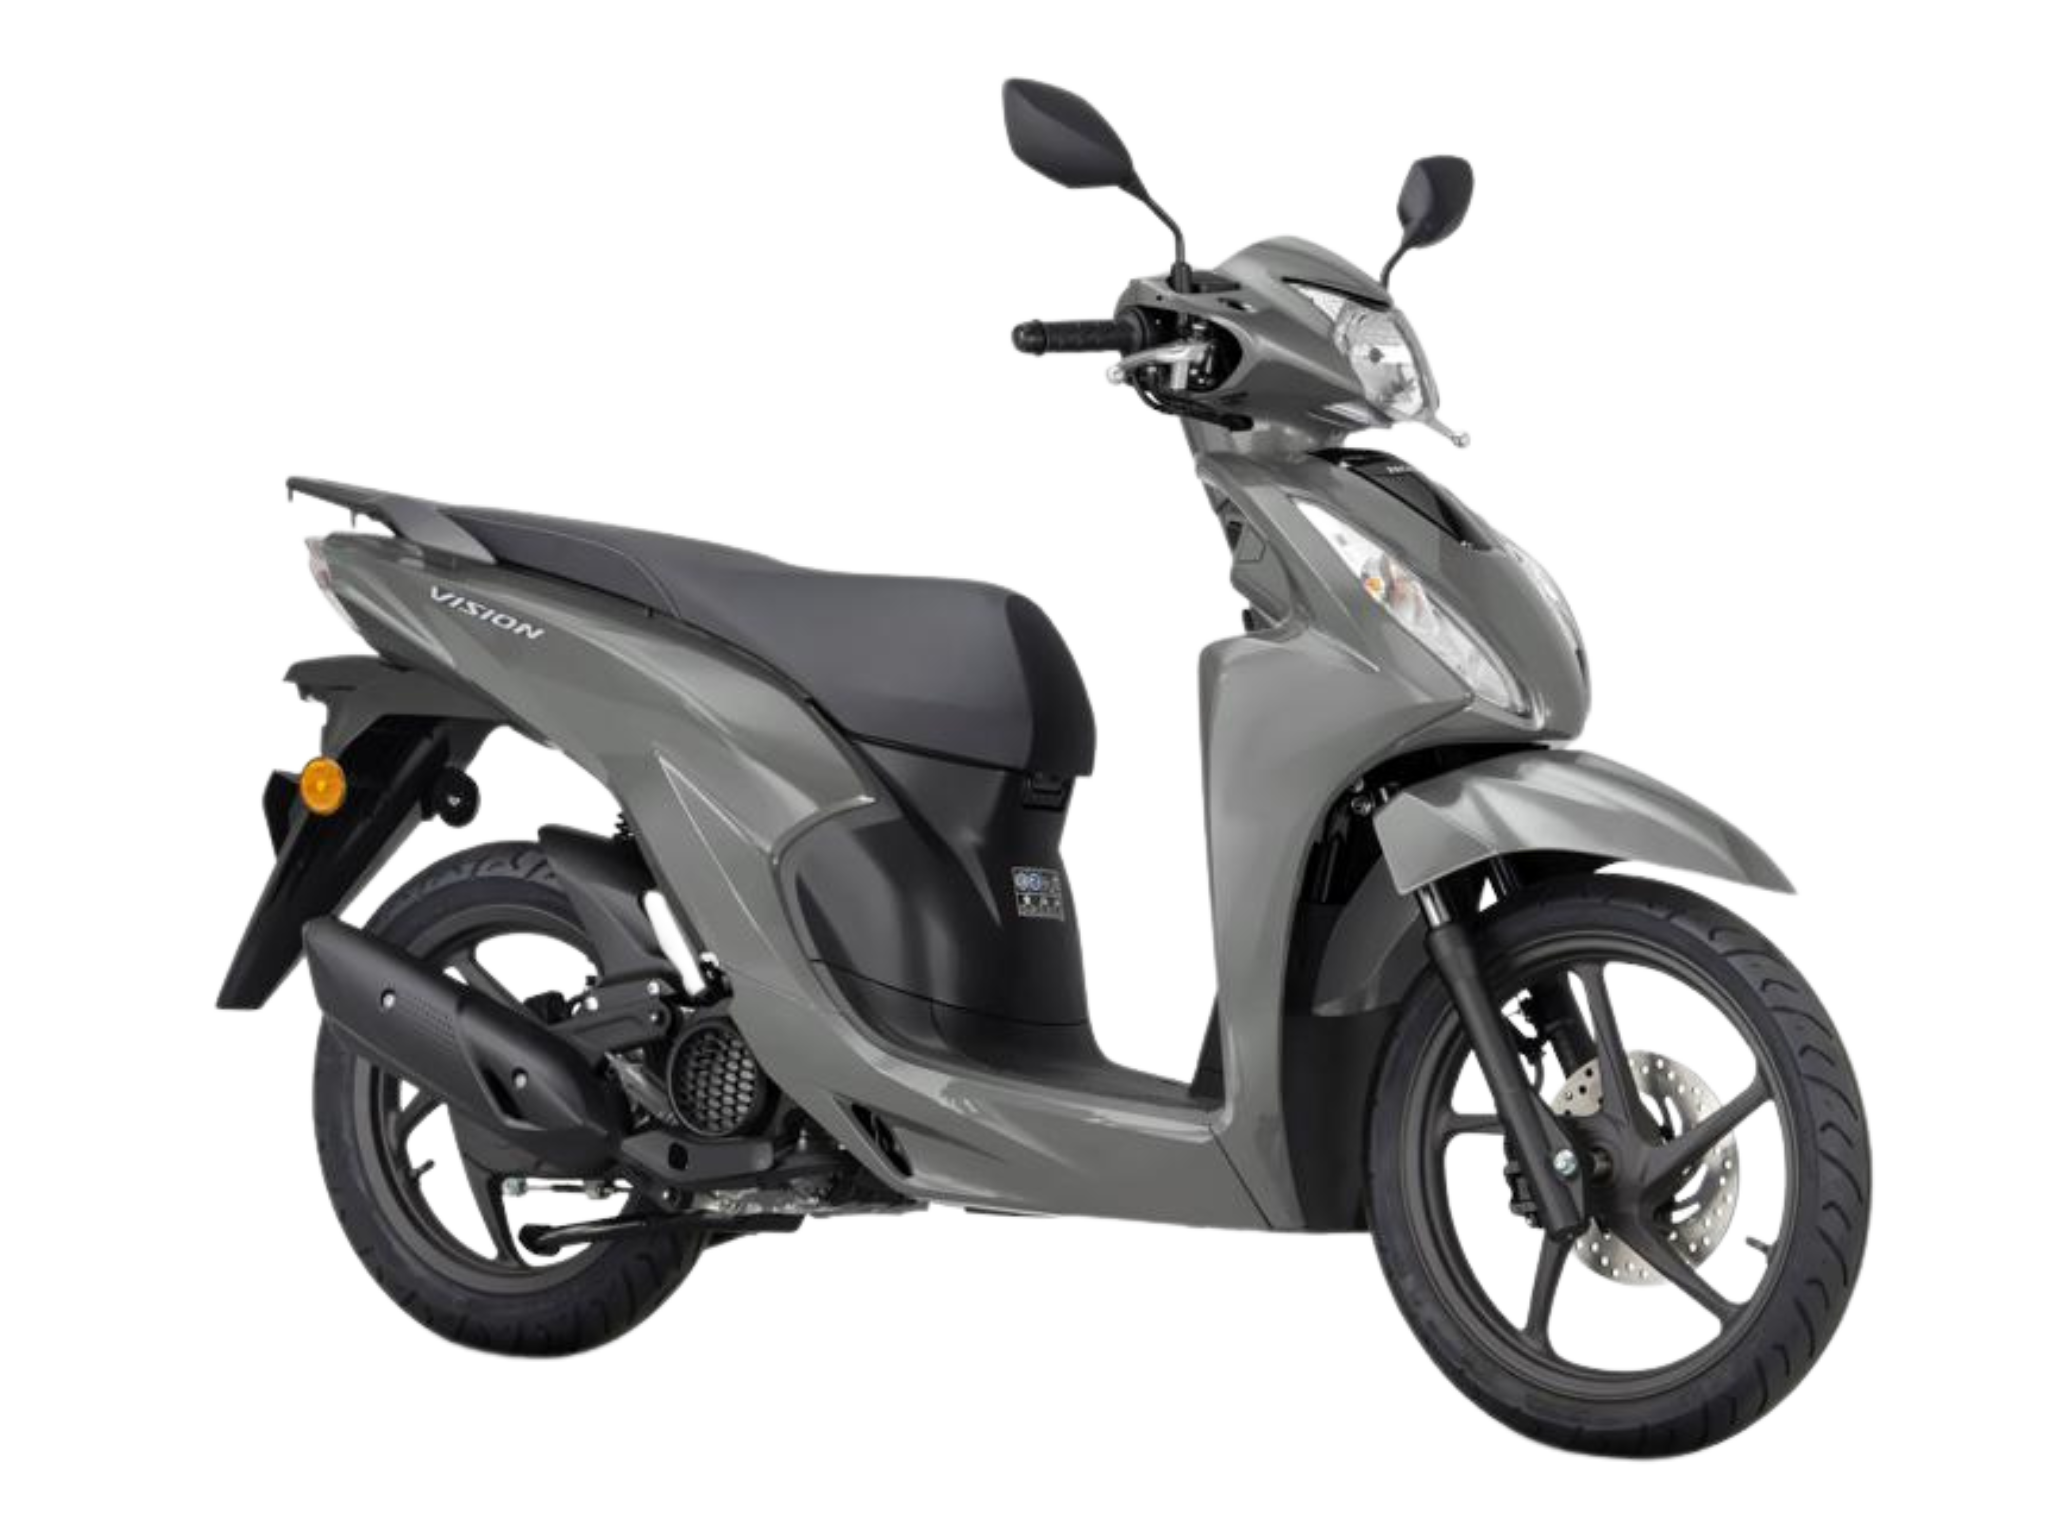 Top five 125cc scooters for 2021